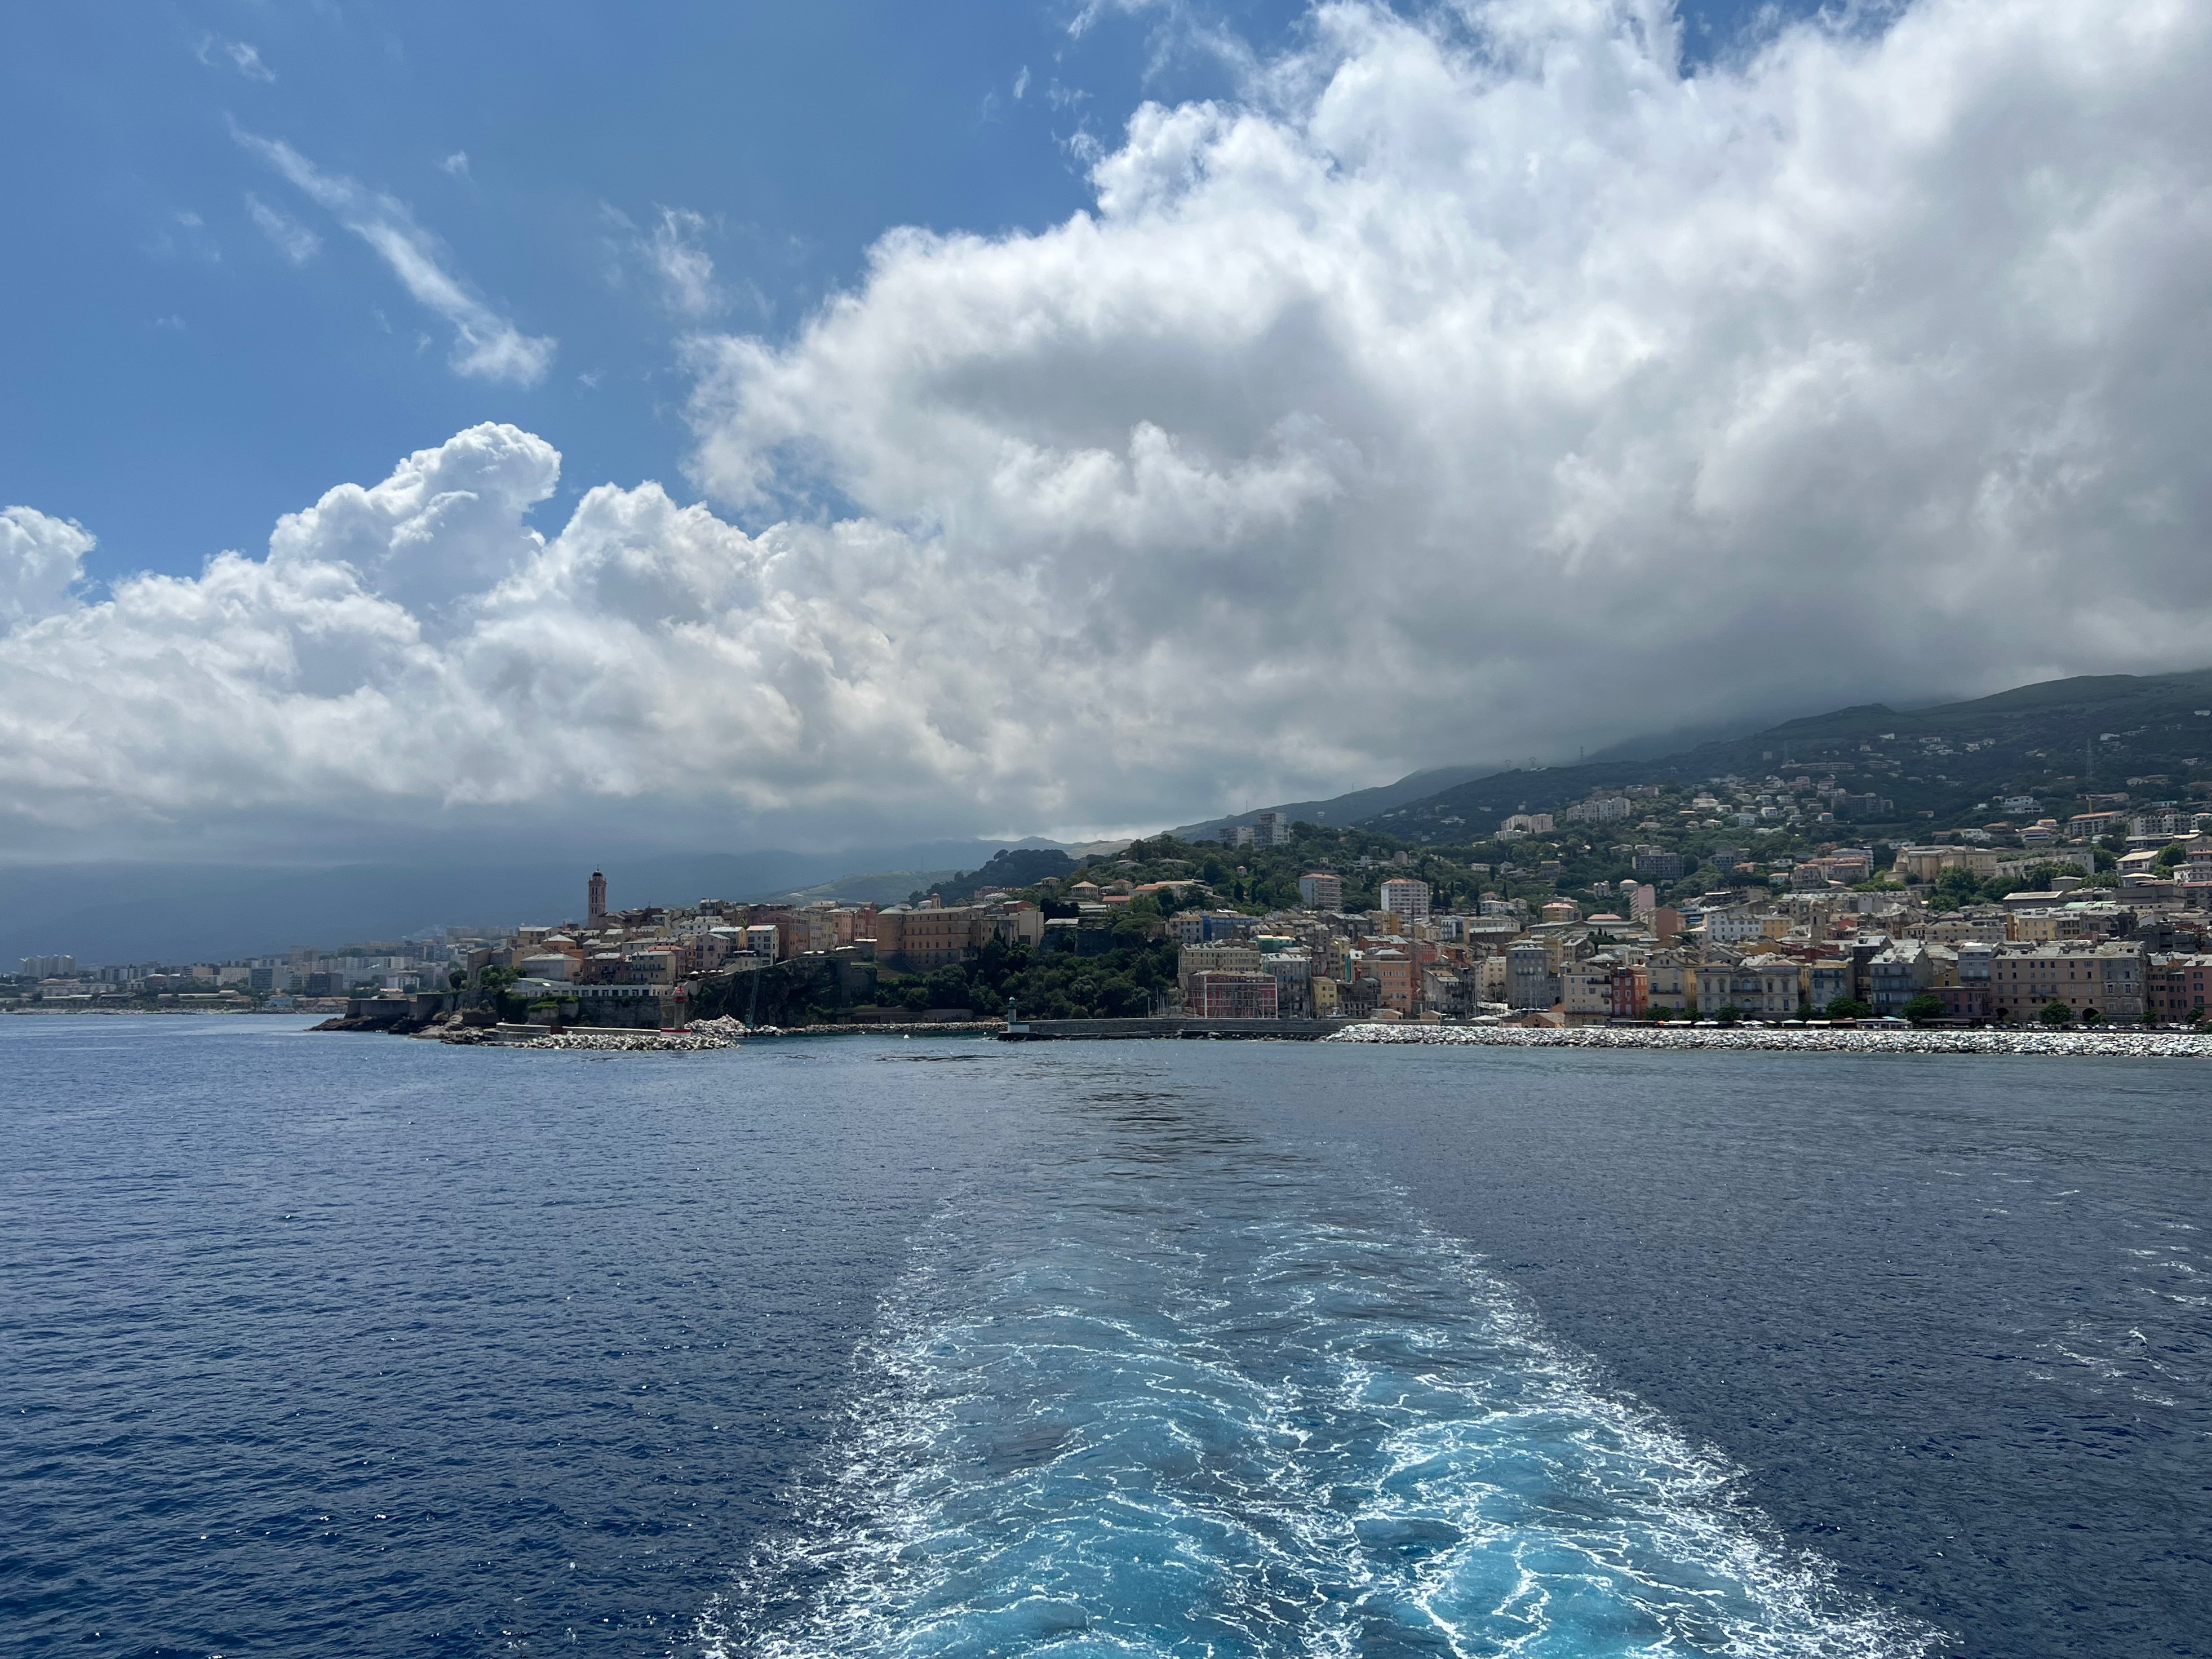 View from the ferry to Bastia